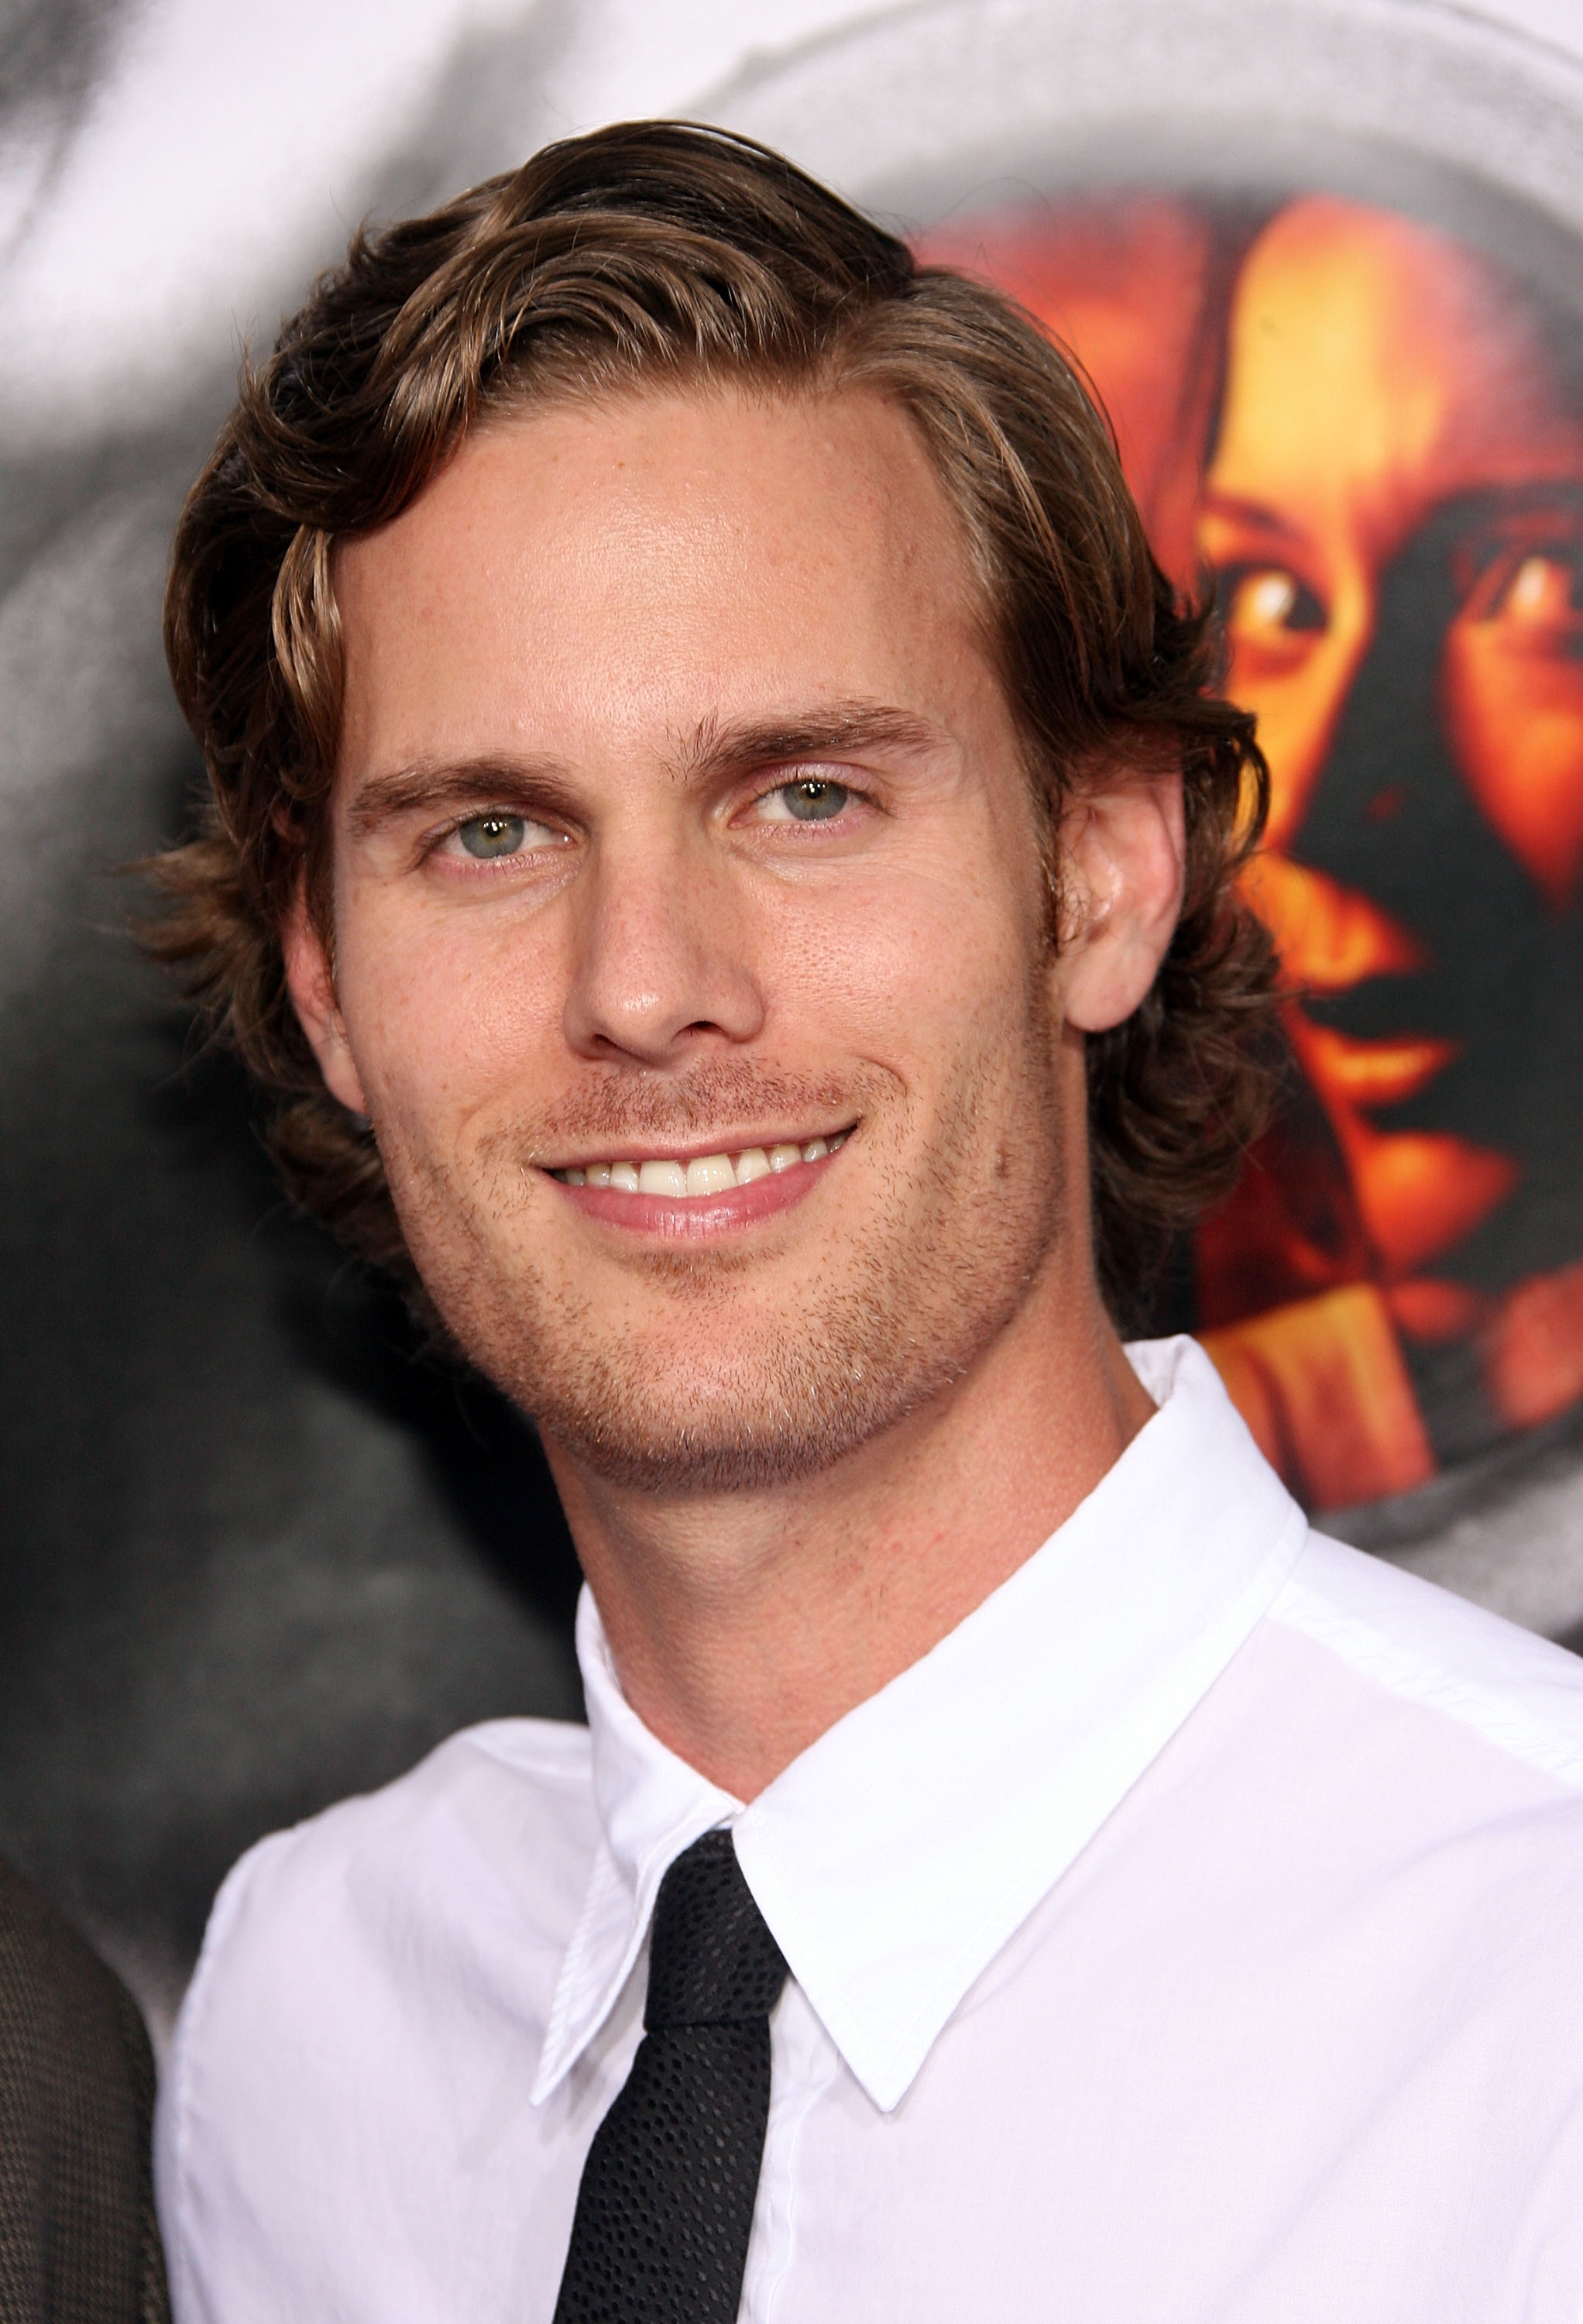 Christopher Landon at the premiere of "Disturbia" in Hollywood in 2007 | Source: Getty Images